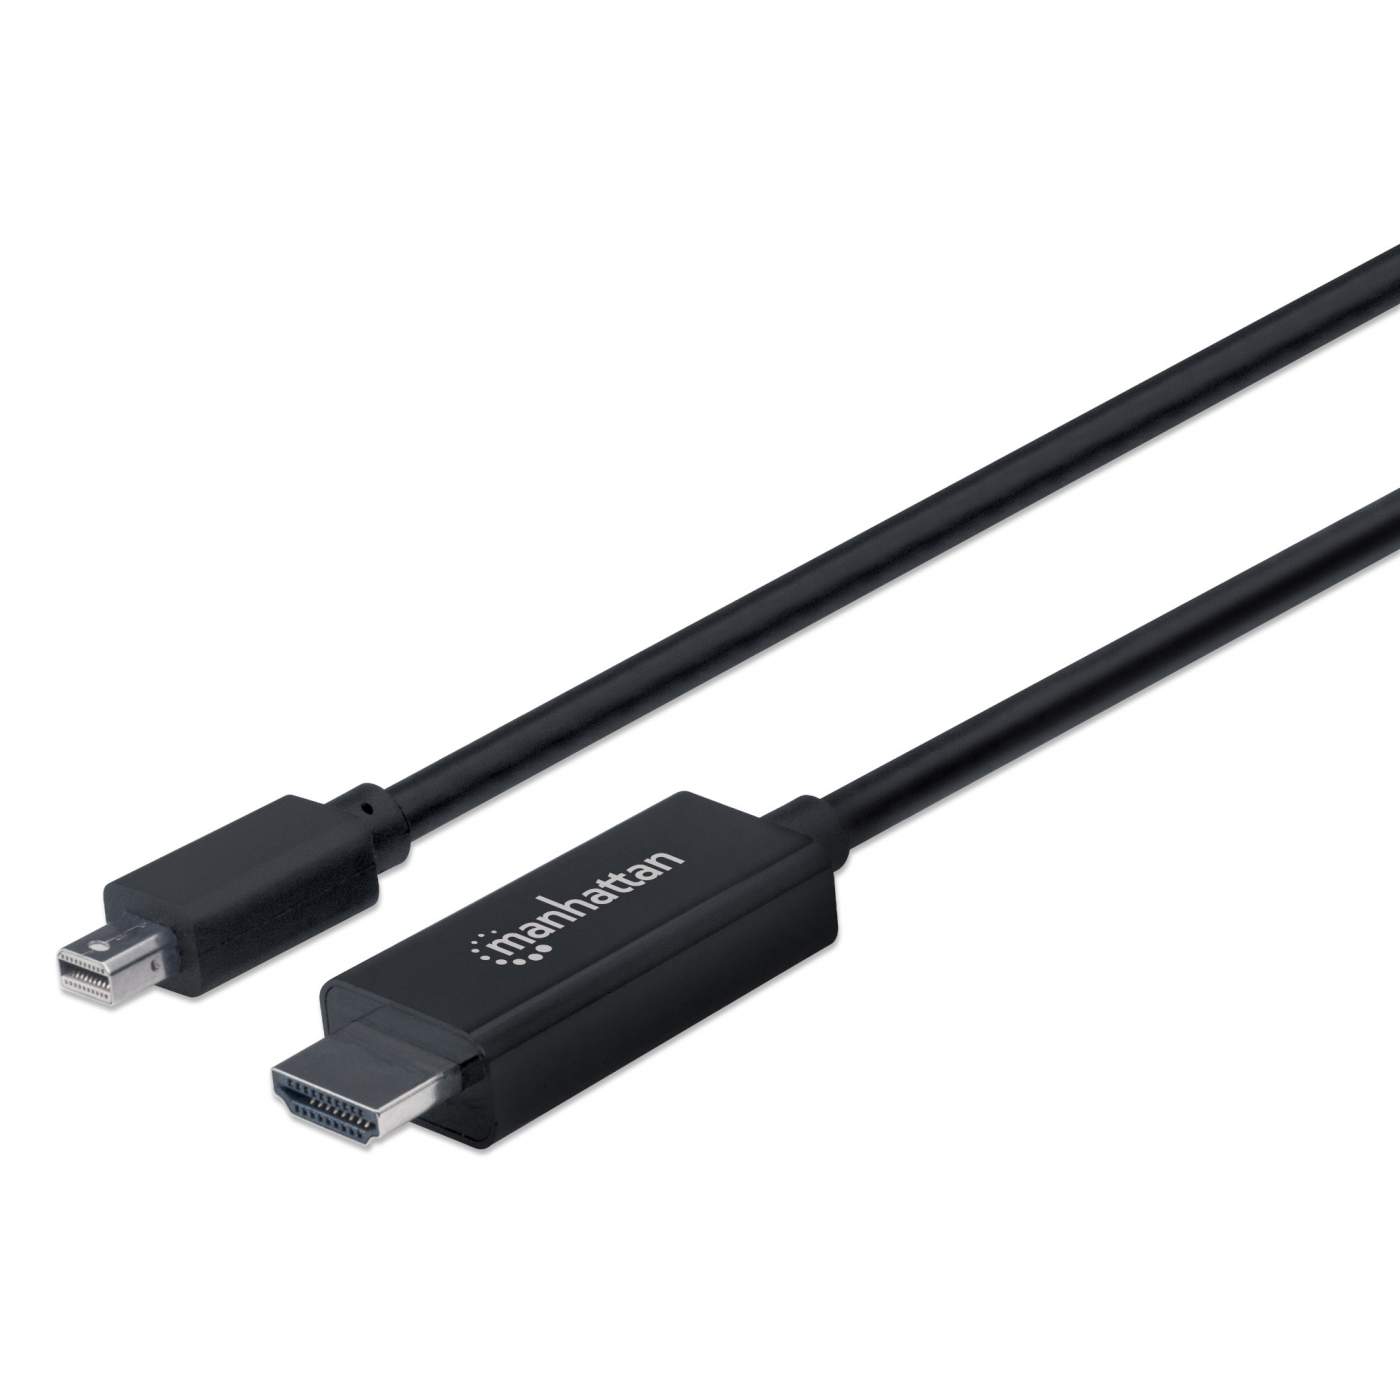 Black-i DISPLAY PORT TO HDMI CABLE 1.8 METER - Bharathi Systems